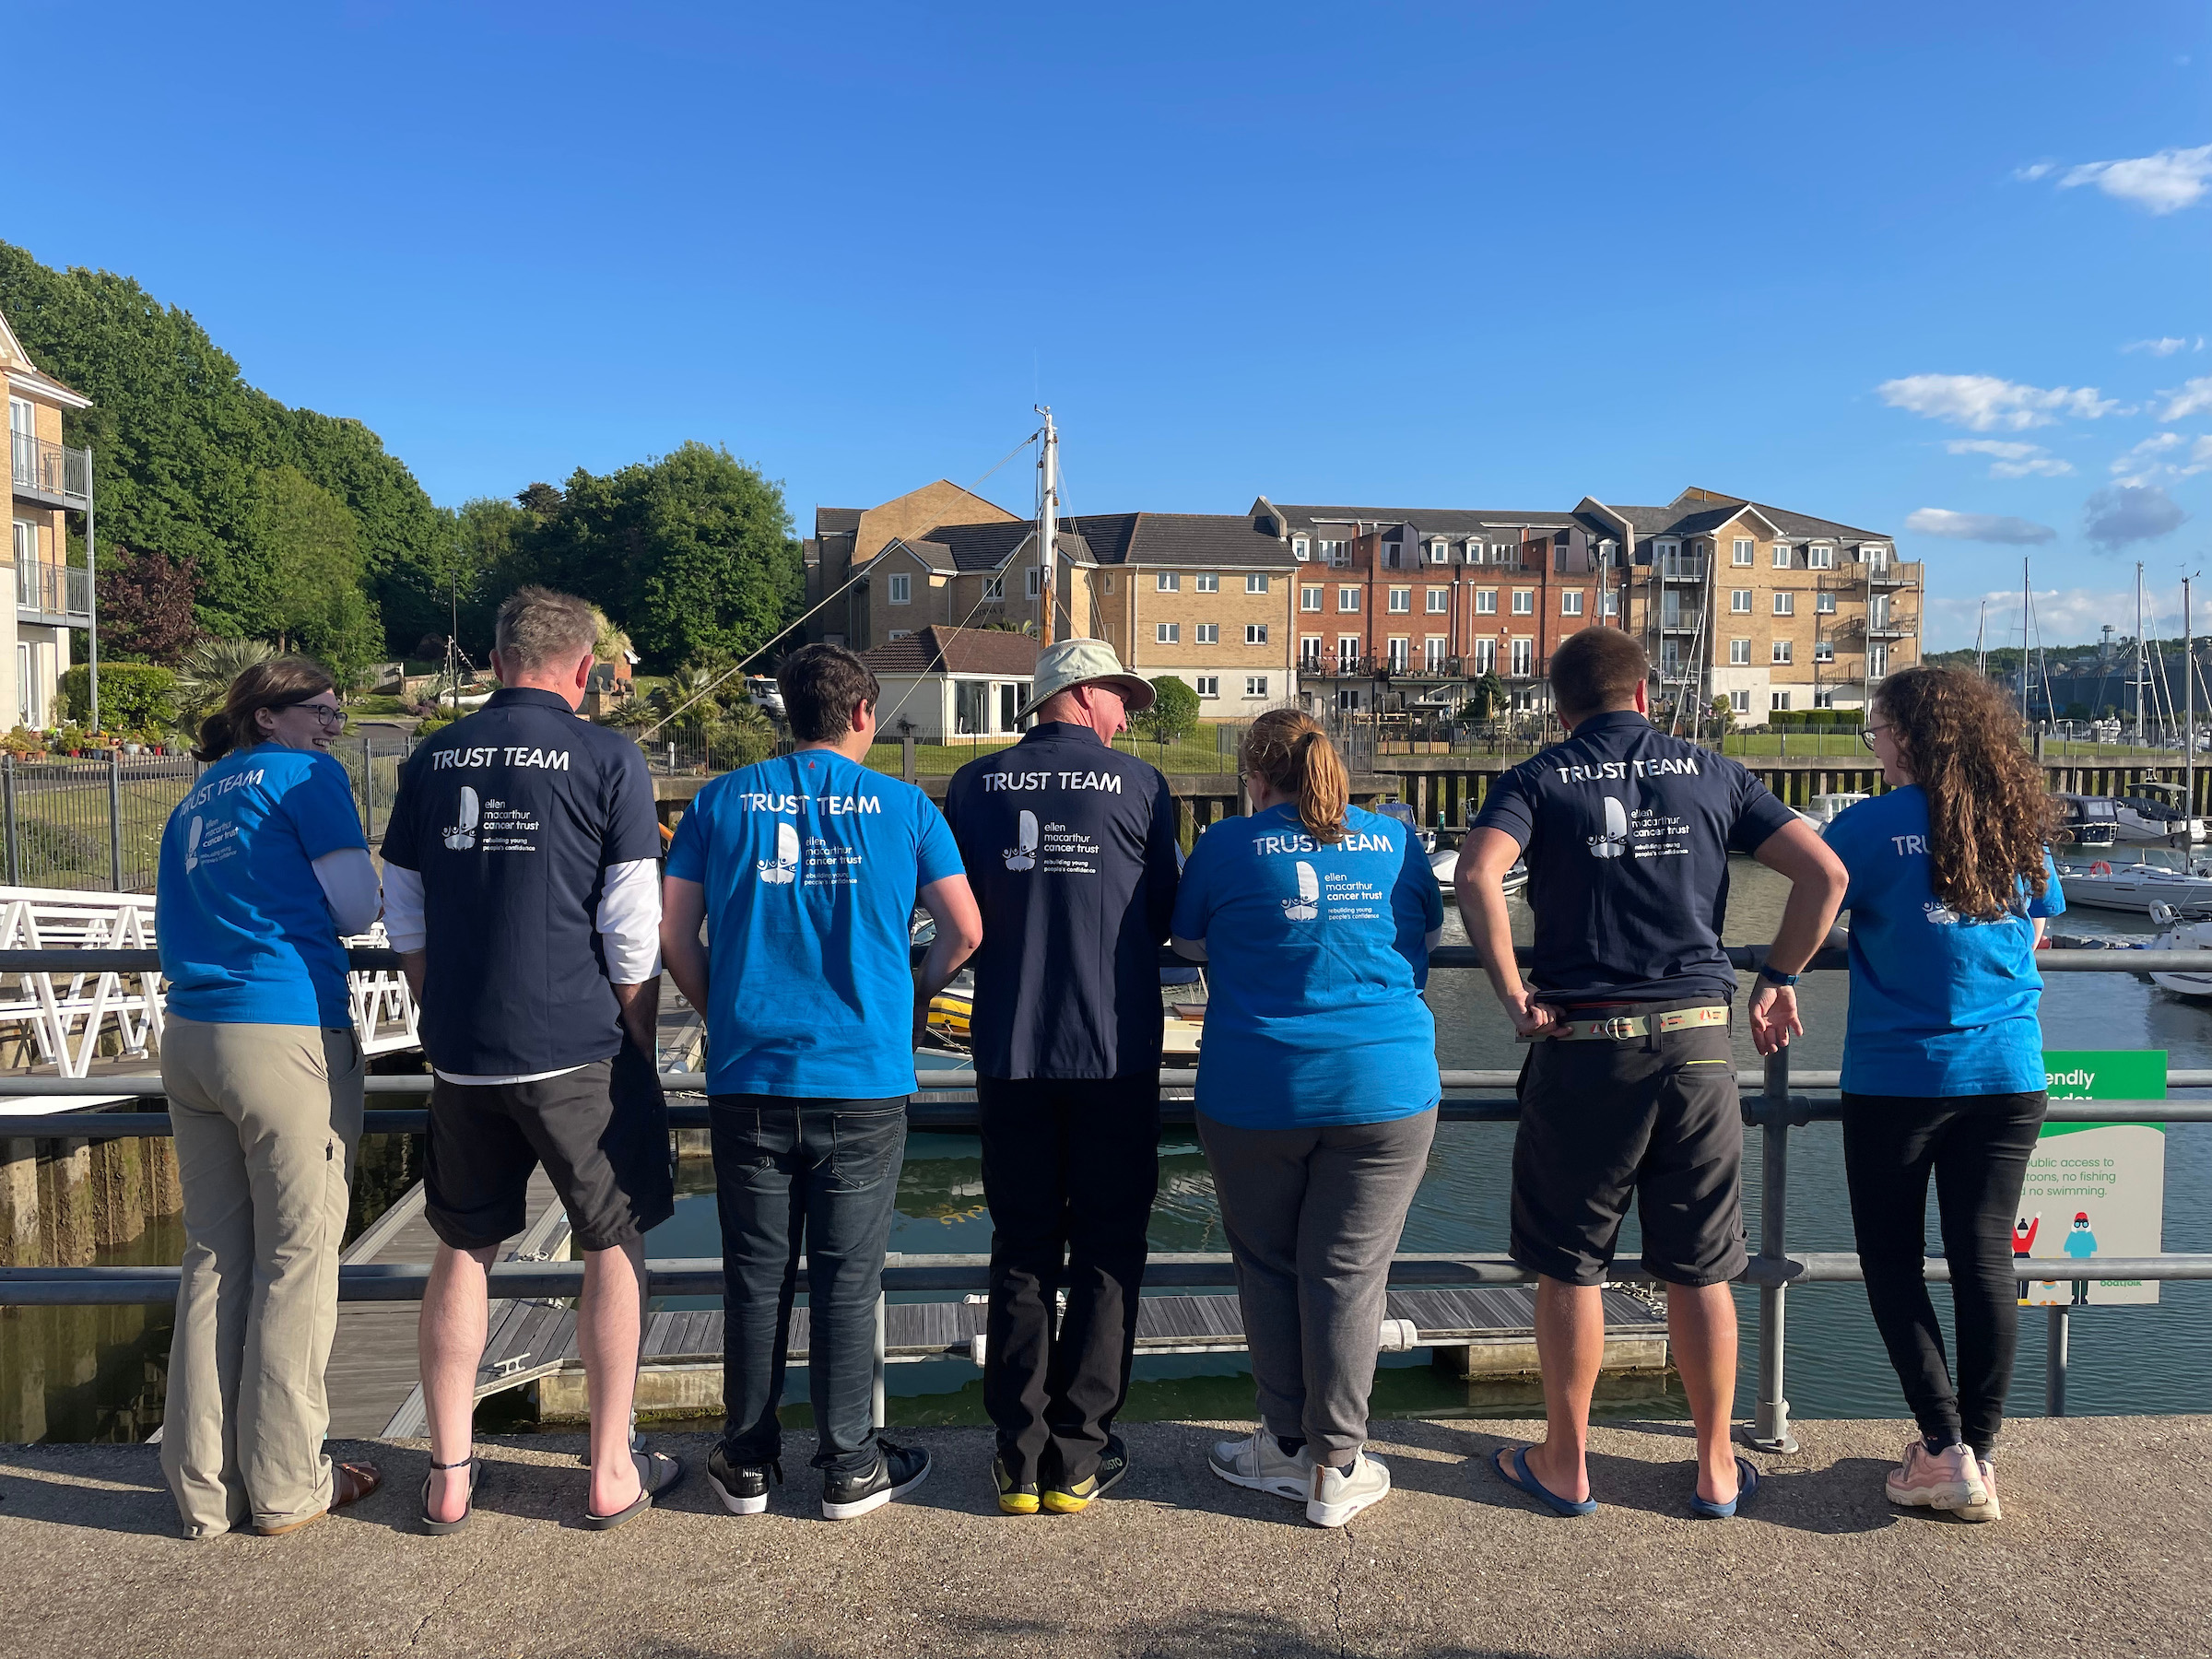 Volunteer and skippers with their backs to the camera, showing their t-shirts which say 'Trust team' along the back, as they look out over the sunny East Cowes marina